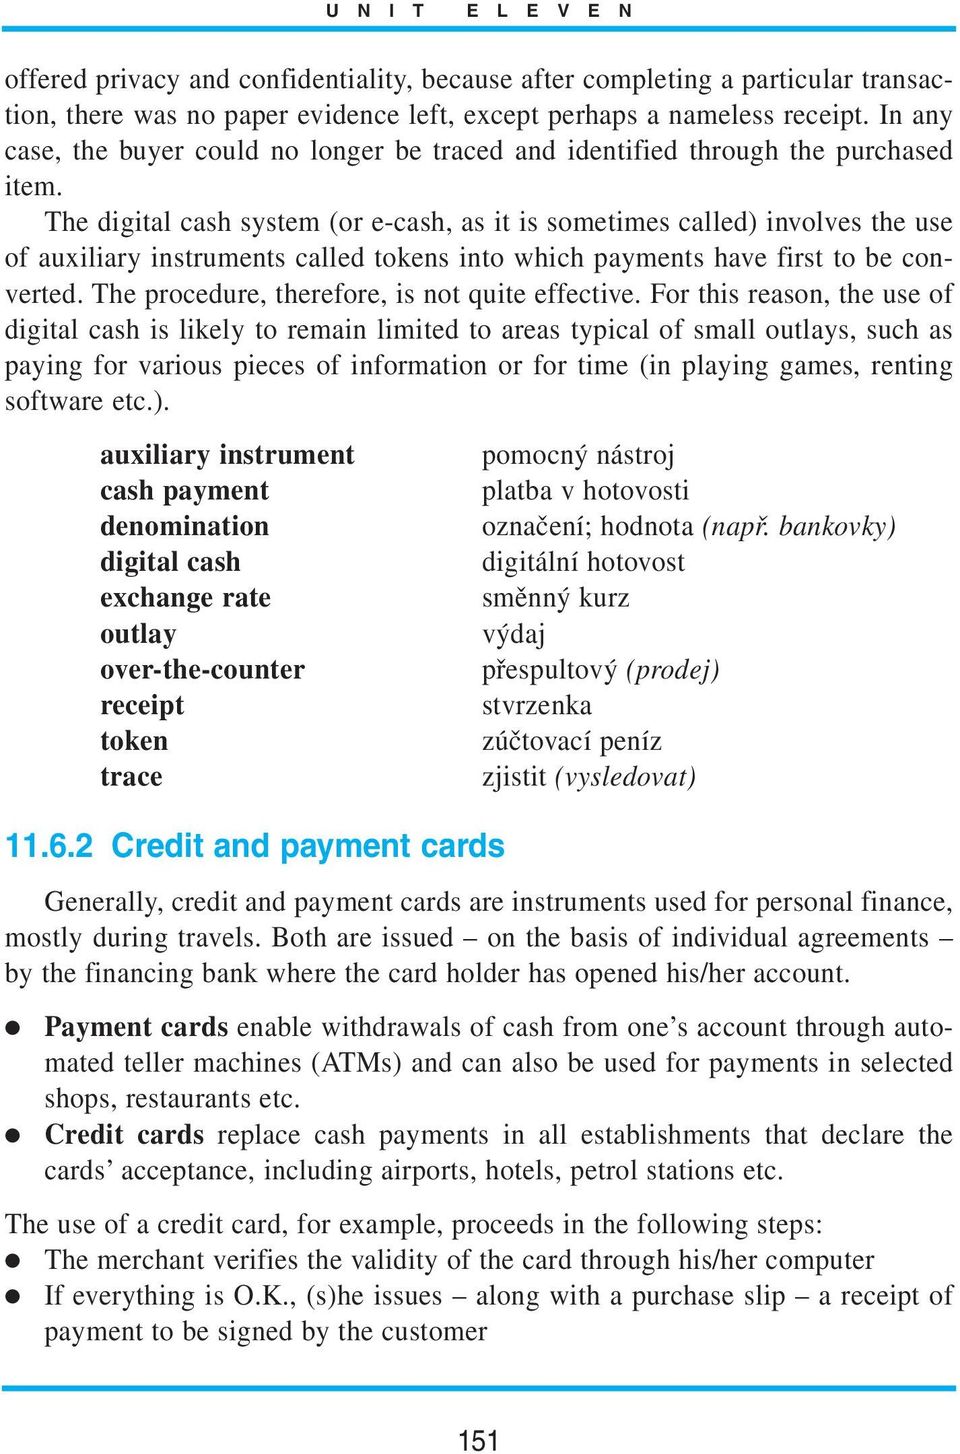 The digital cash system (or e-cash, as it is sometimes called) involves the use of auxiliary instruments called tokens into which payments have first to be converted.